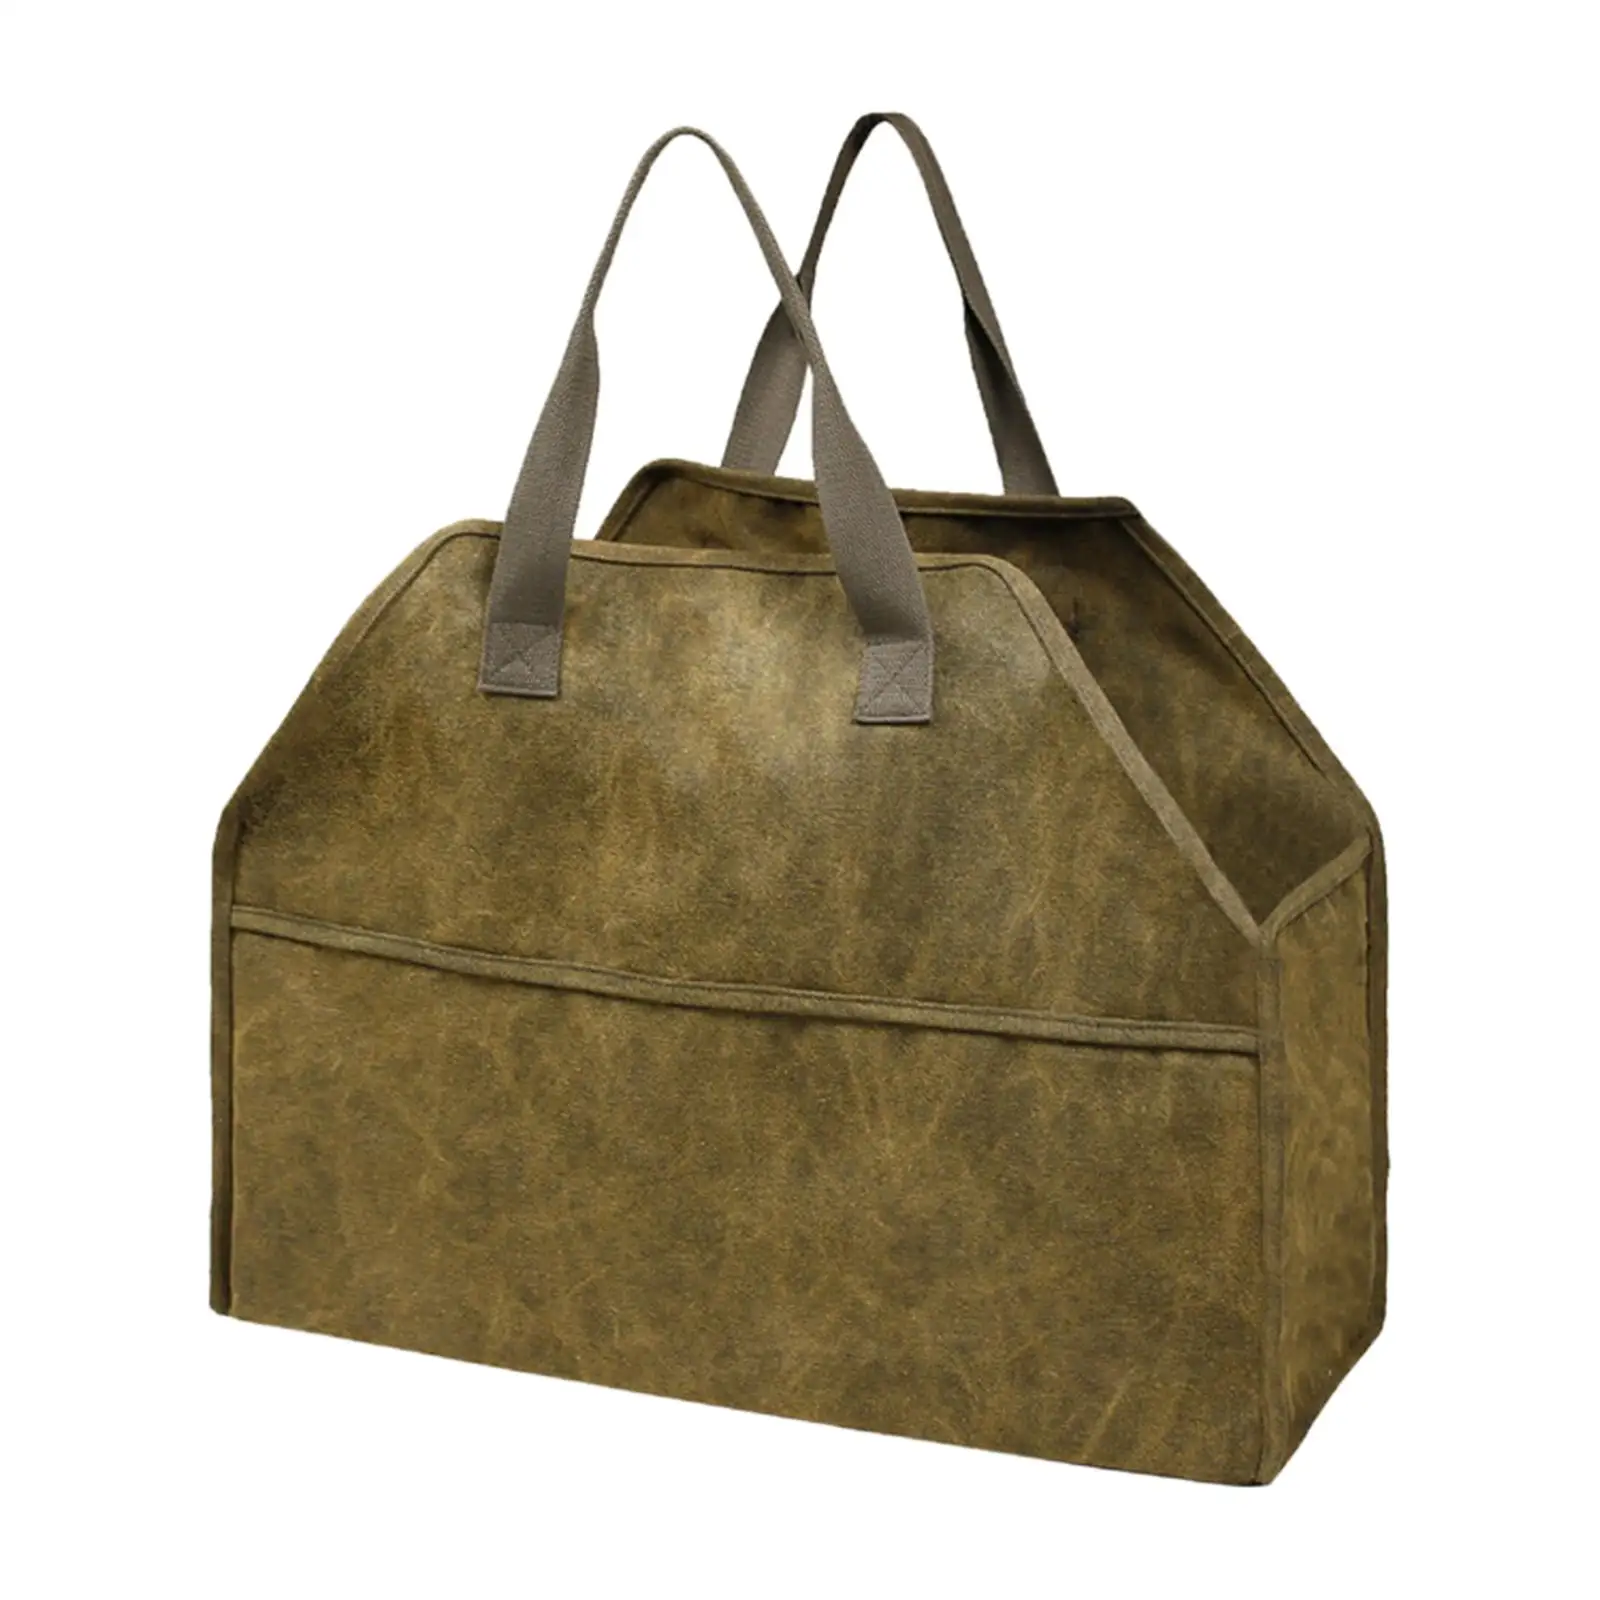 Firewood Carrier Bag Carrying Wood Storage Tote for Holding Twigs Camping